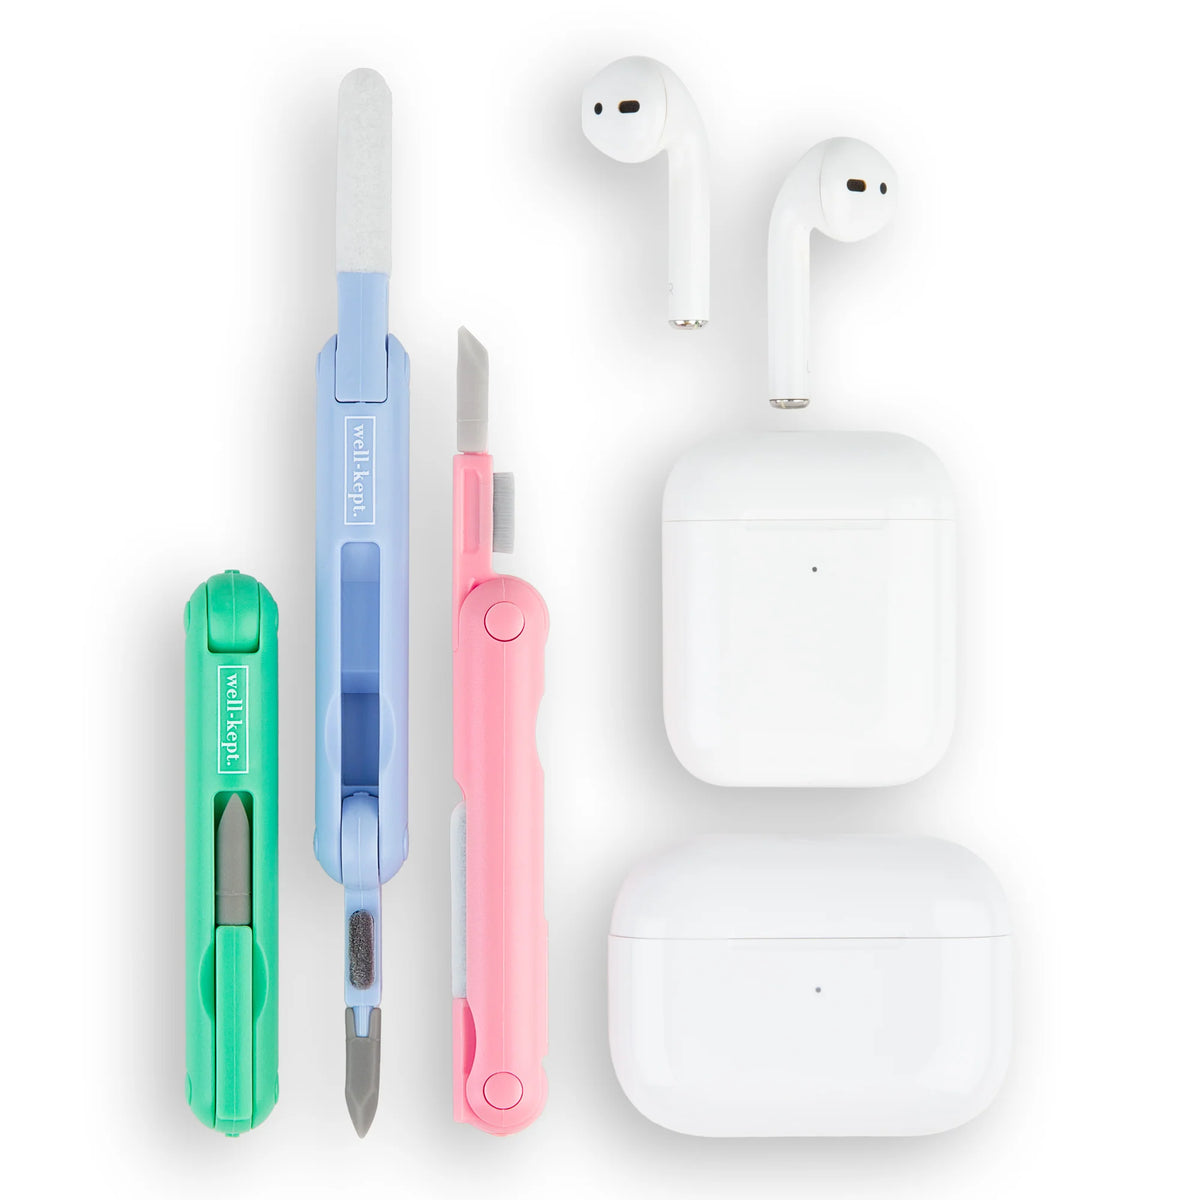 Little Buddies Earbud Cleaning Kit - The Preppy Bunny